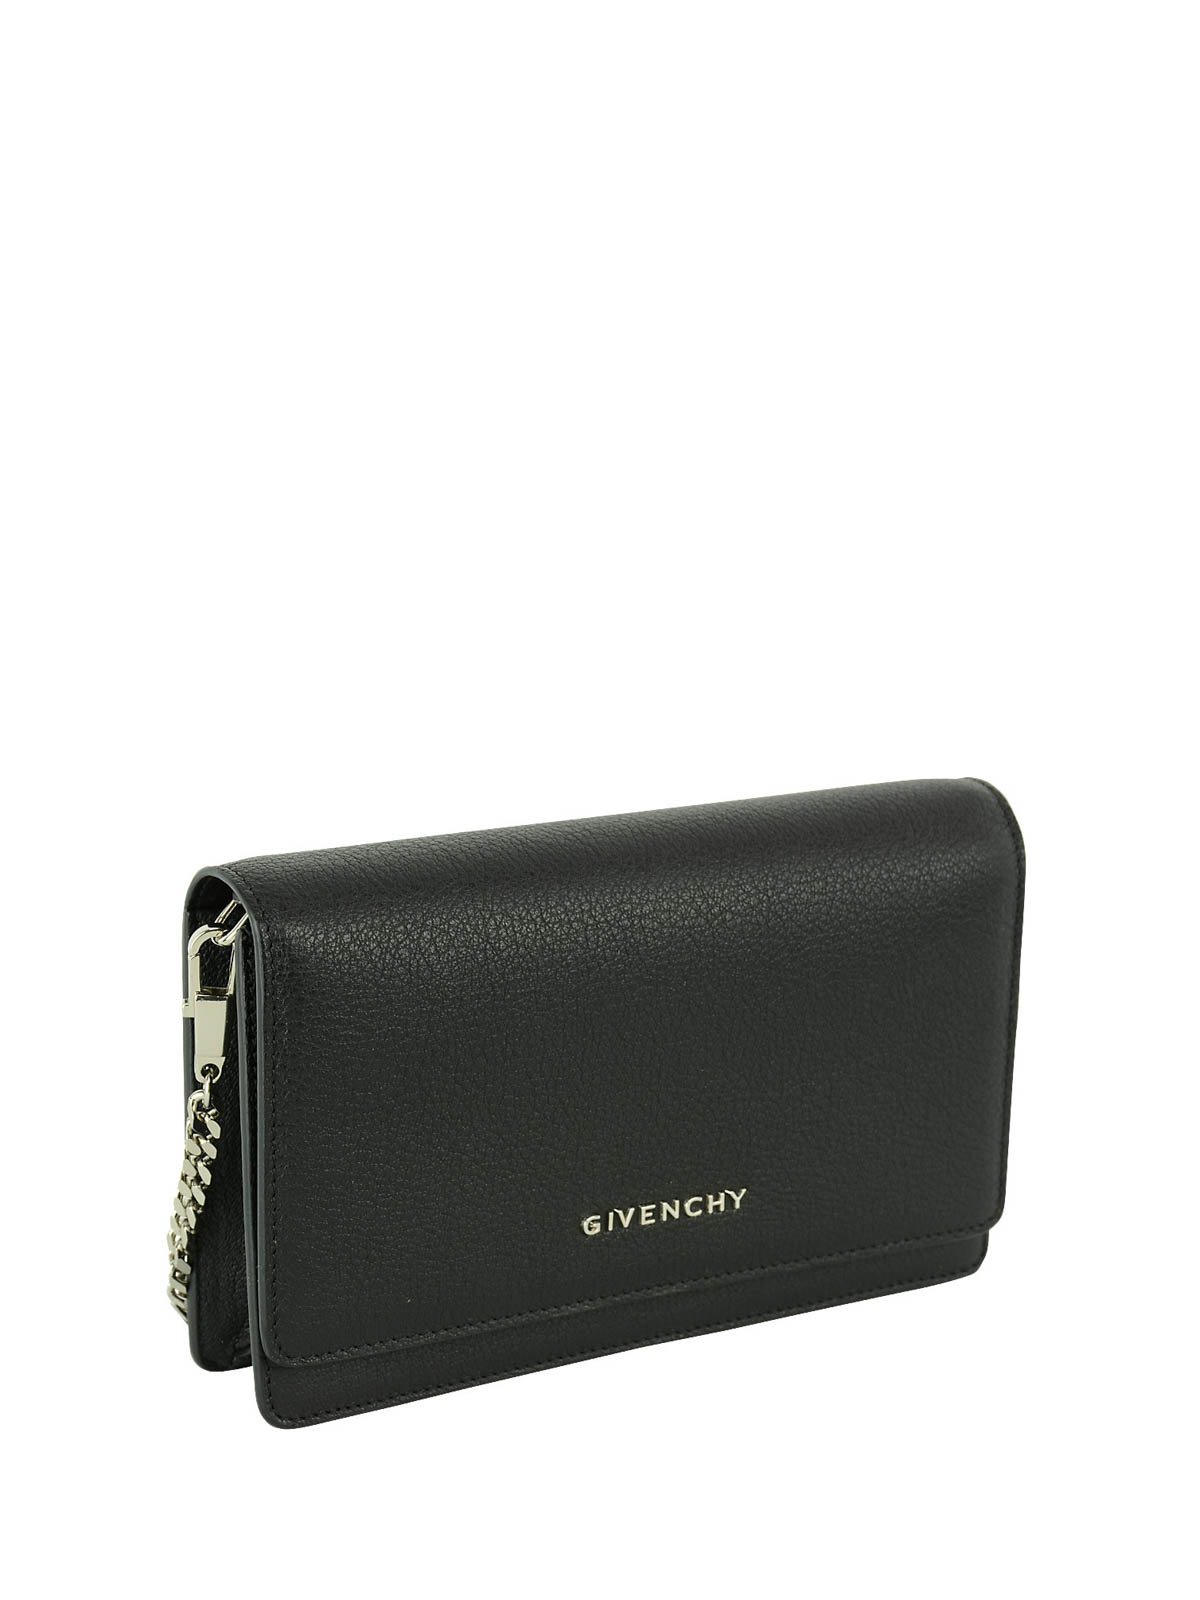 givenchy wallet on chain